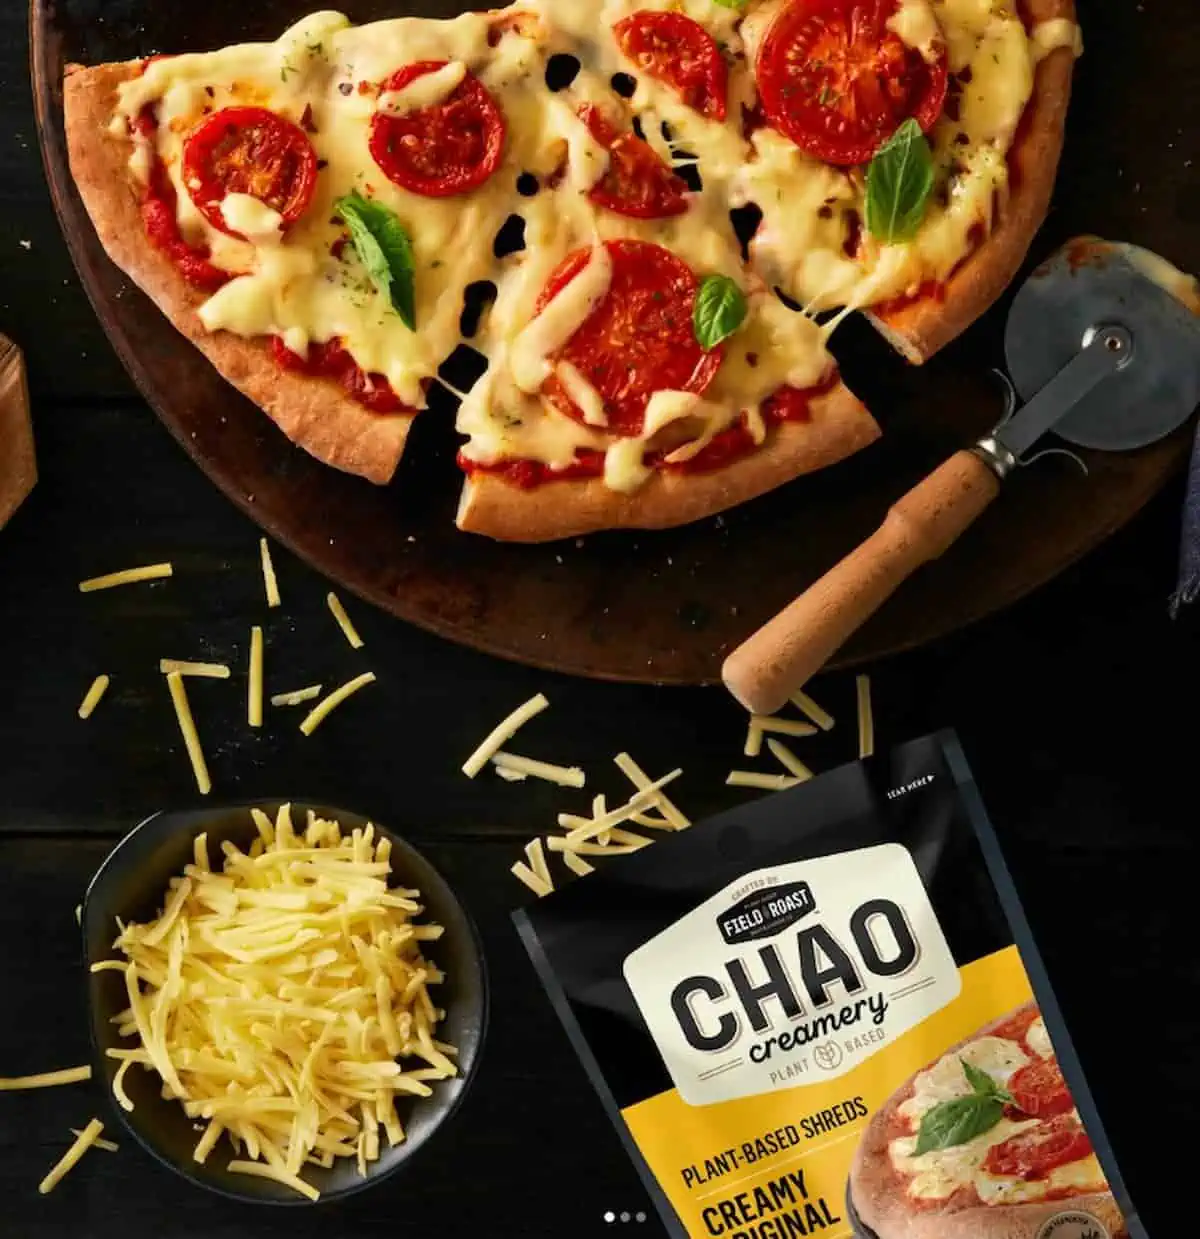 Vegan pizza next to a package of Field Roast Chao vegan cheese shreds.